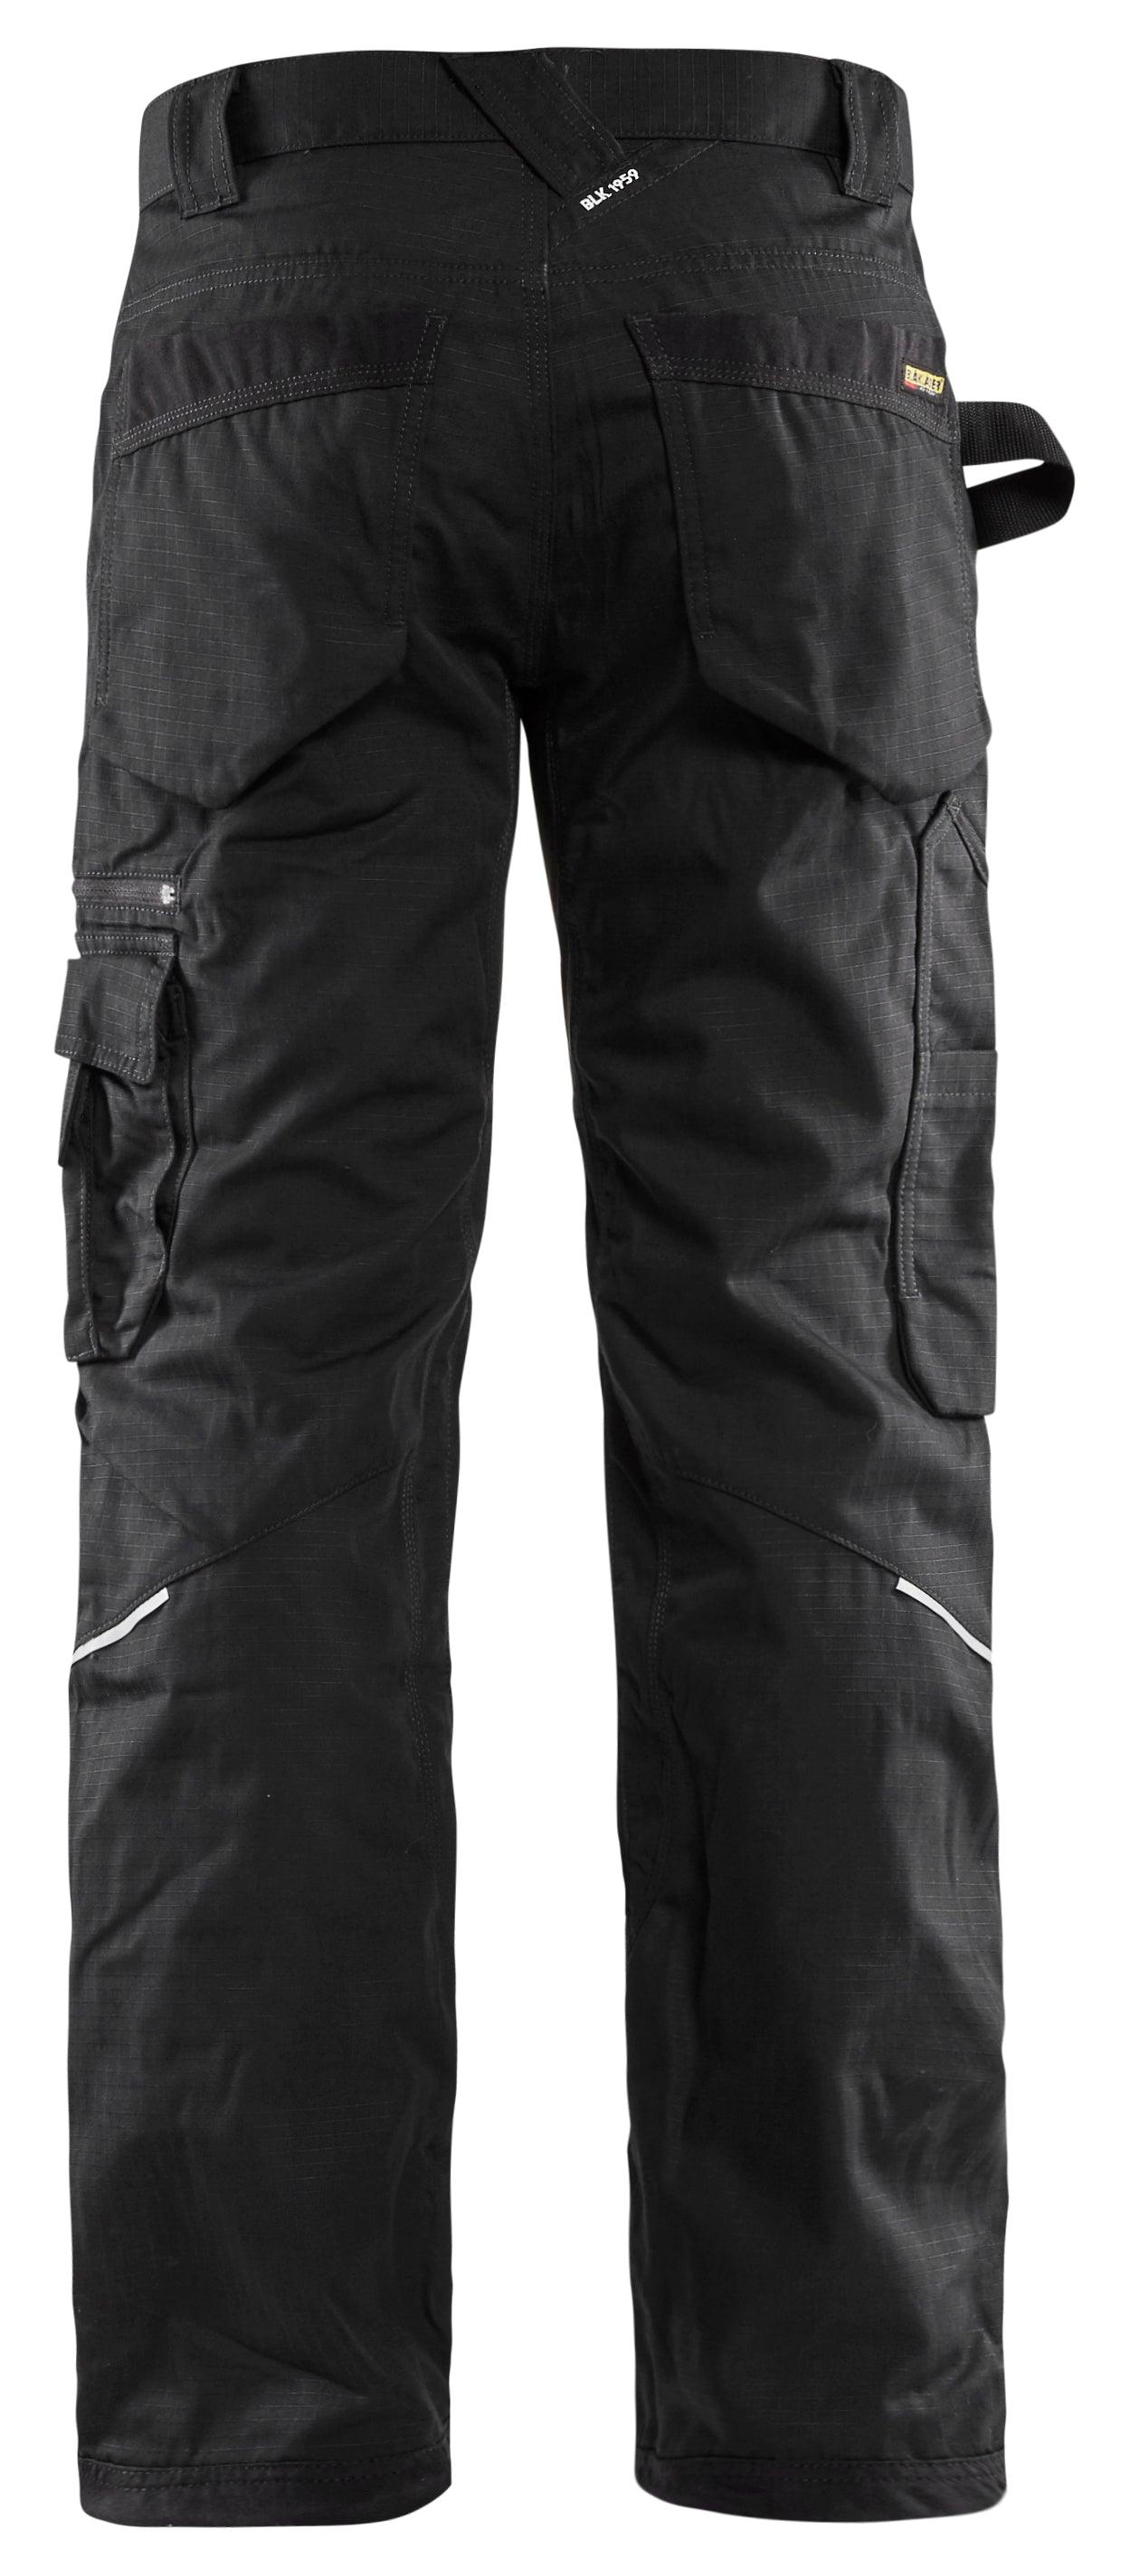 Blaklader 1690 7oz Rip Stop Pants with Stretch - Black - Trusted Gear Company LLC